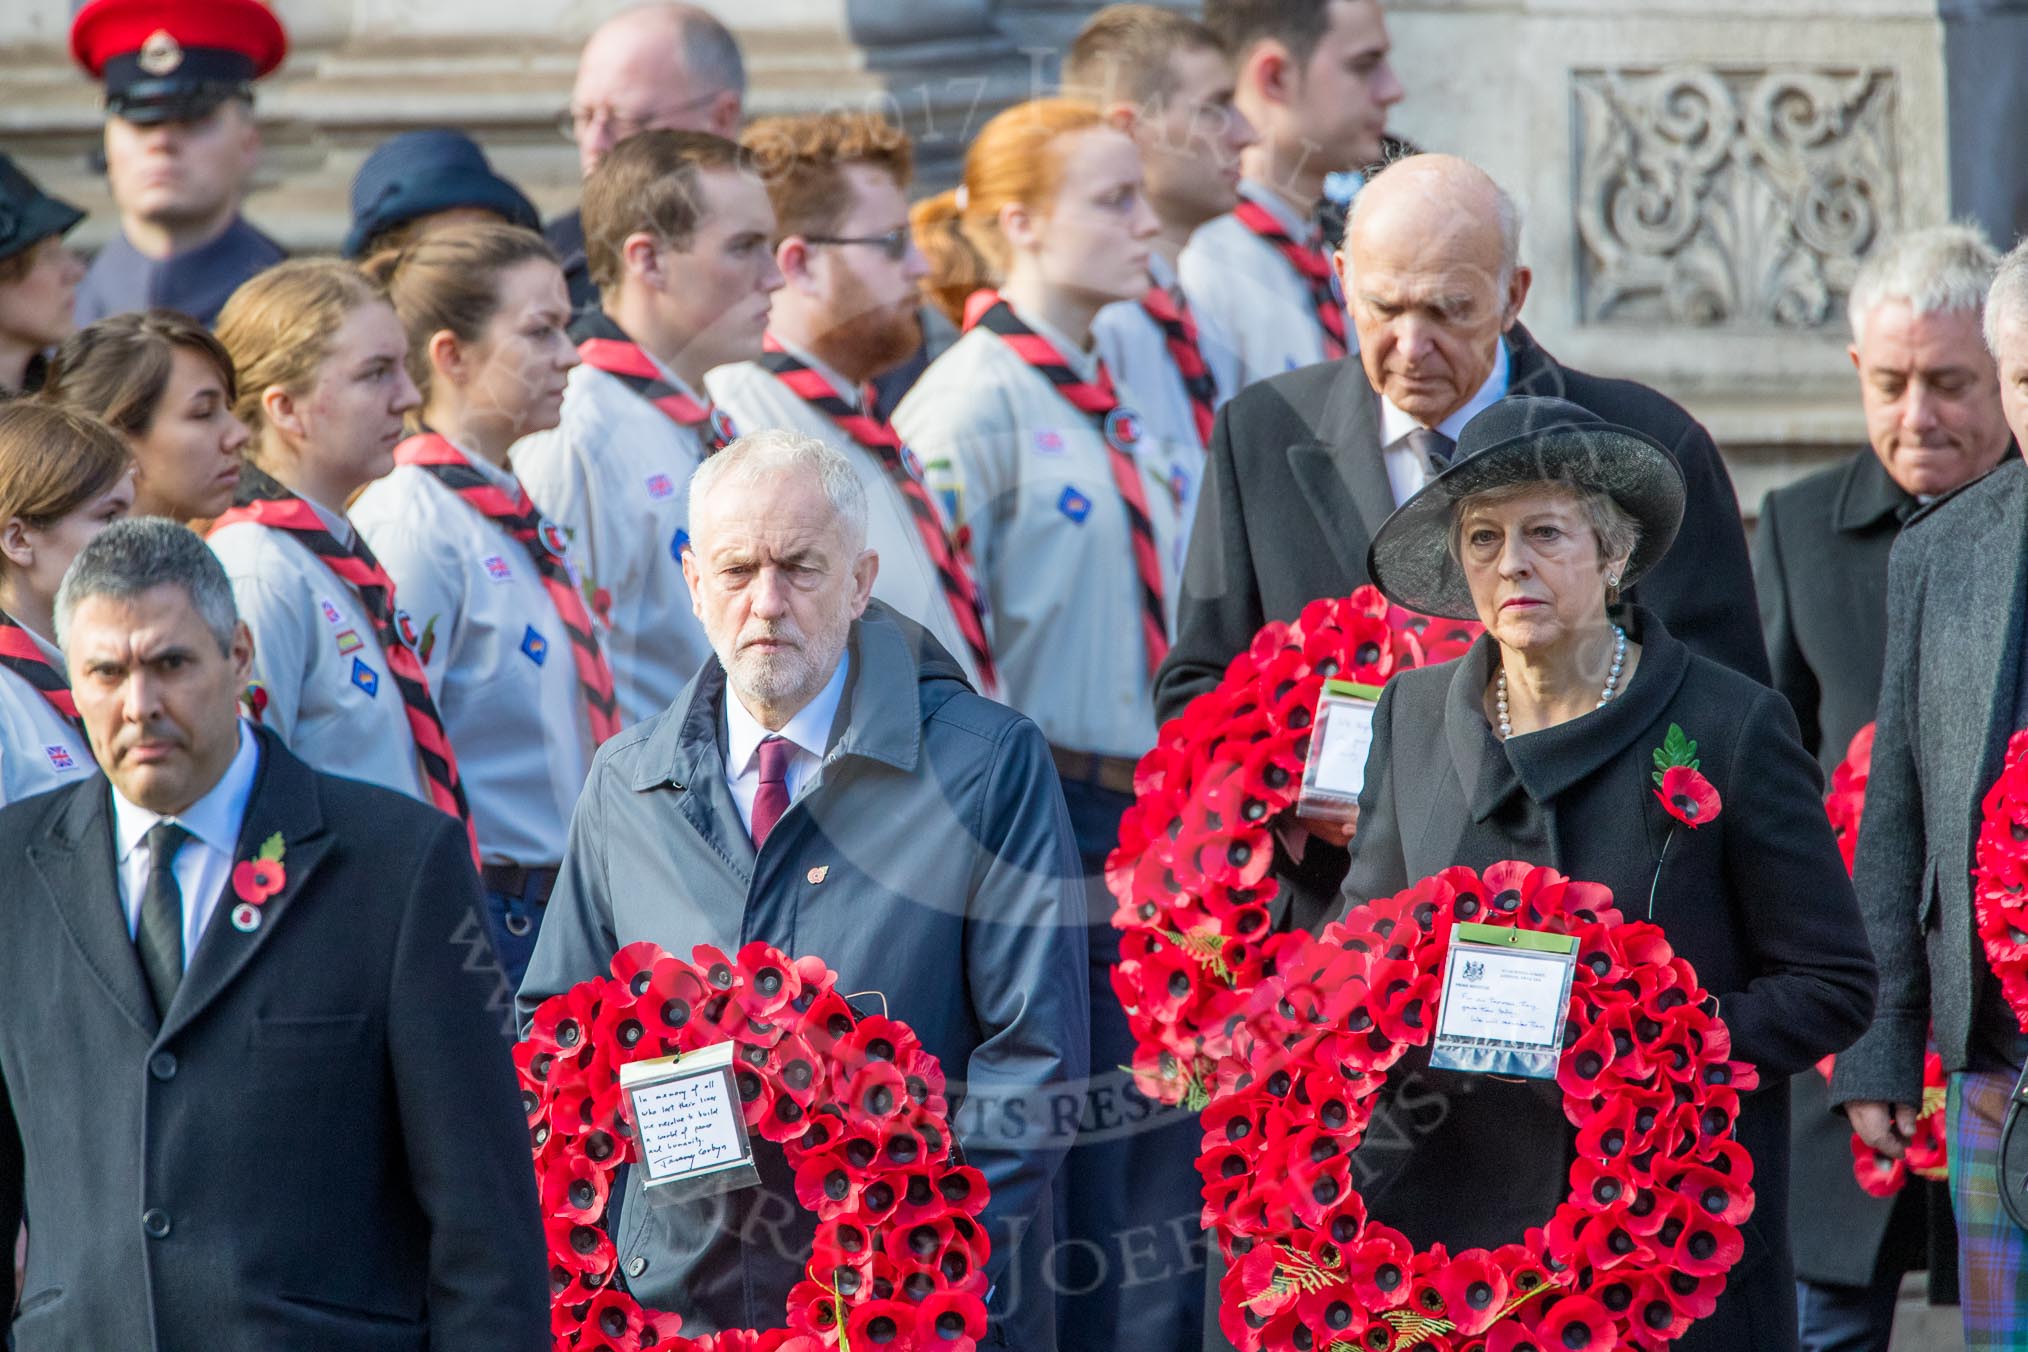 The Rt Hon Jeremy Corbyn MP, (Leader of the Labour Party and Leader of the Opposition)   and the Rt Hon Theresa May MP, Prime Minister, on behalf of the Government, leaving the Foreign and Commonwealth Office with their wreath during Remembrance Sunday Cenotaph Ceremony 2018 at Horse Guards Parade, Westminster, London, 11 November 2018, 10:55.